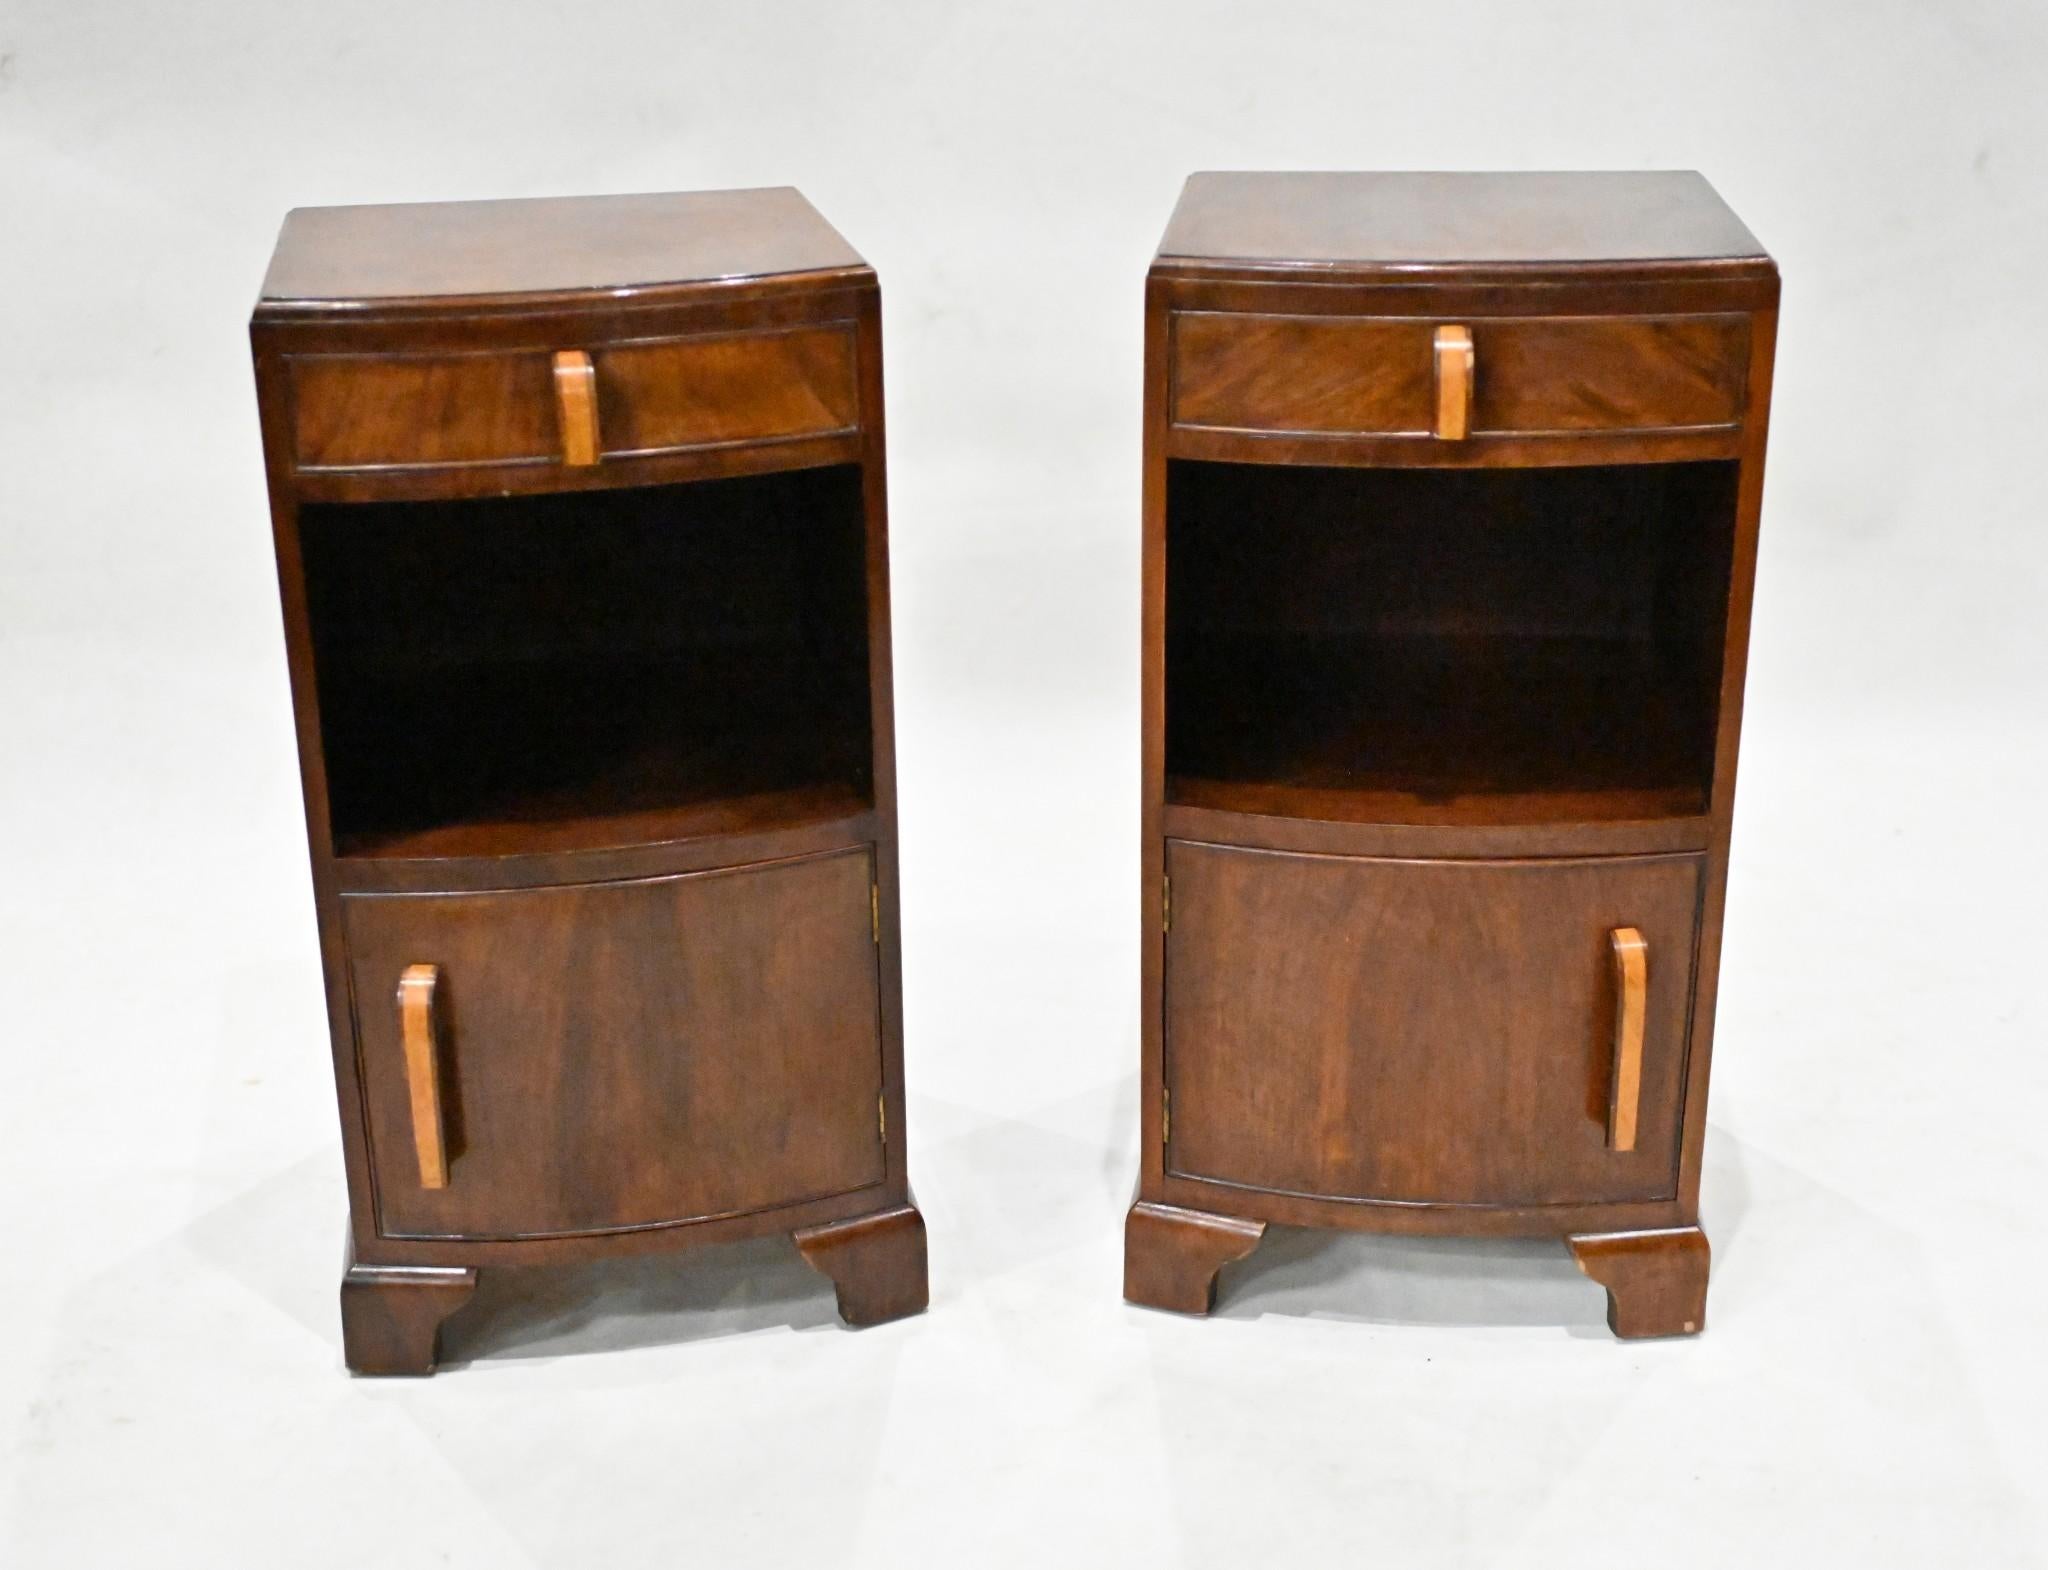 Pair Period Art Deco Bedside Cabinets Nightstands 1920s For Sale 3